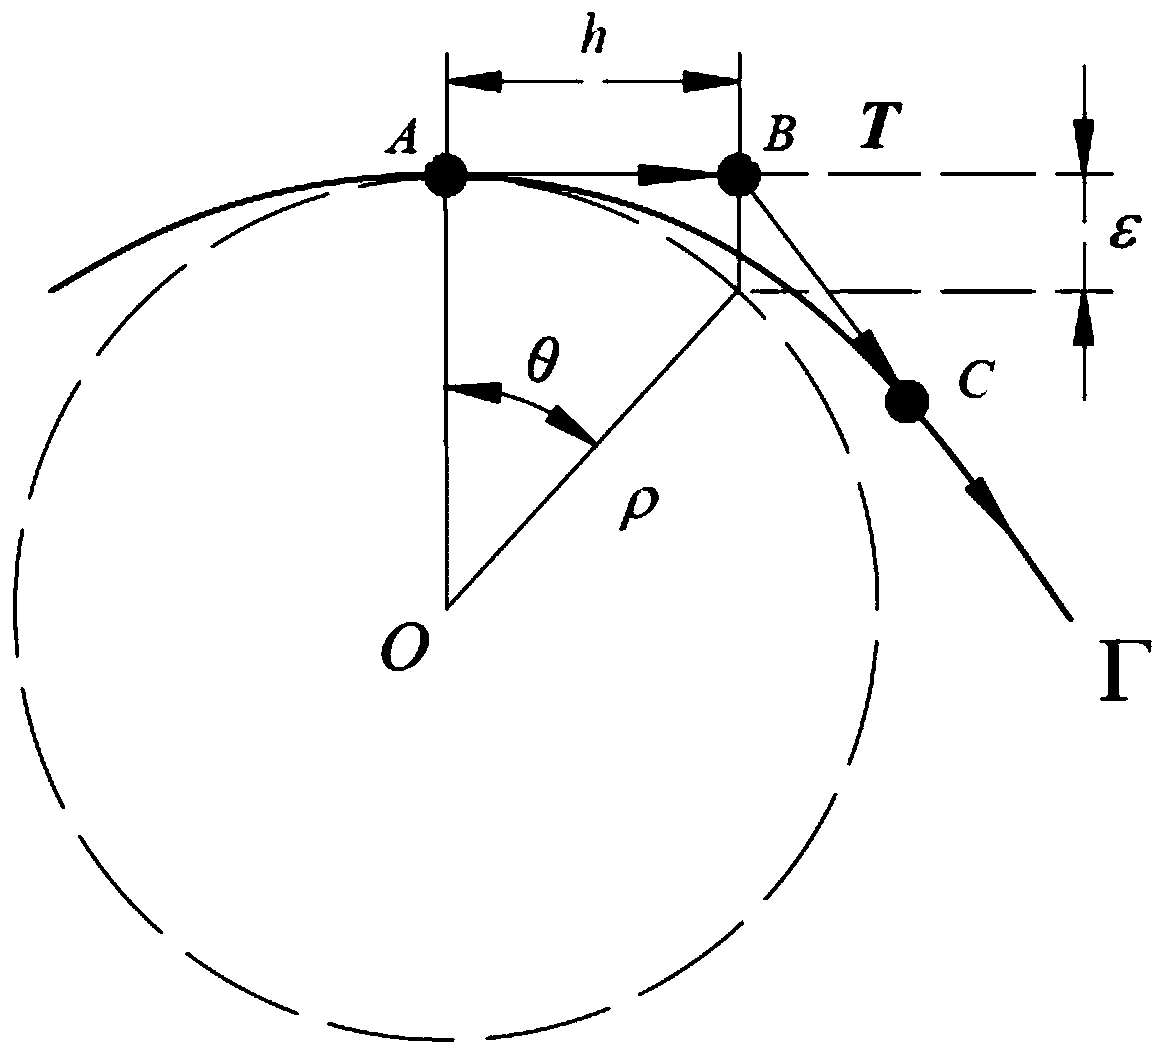 A Method of Tracing Equilibrium Solution Manifold of Power System Based on Curvature Radius